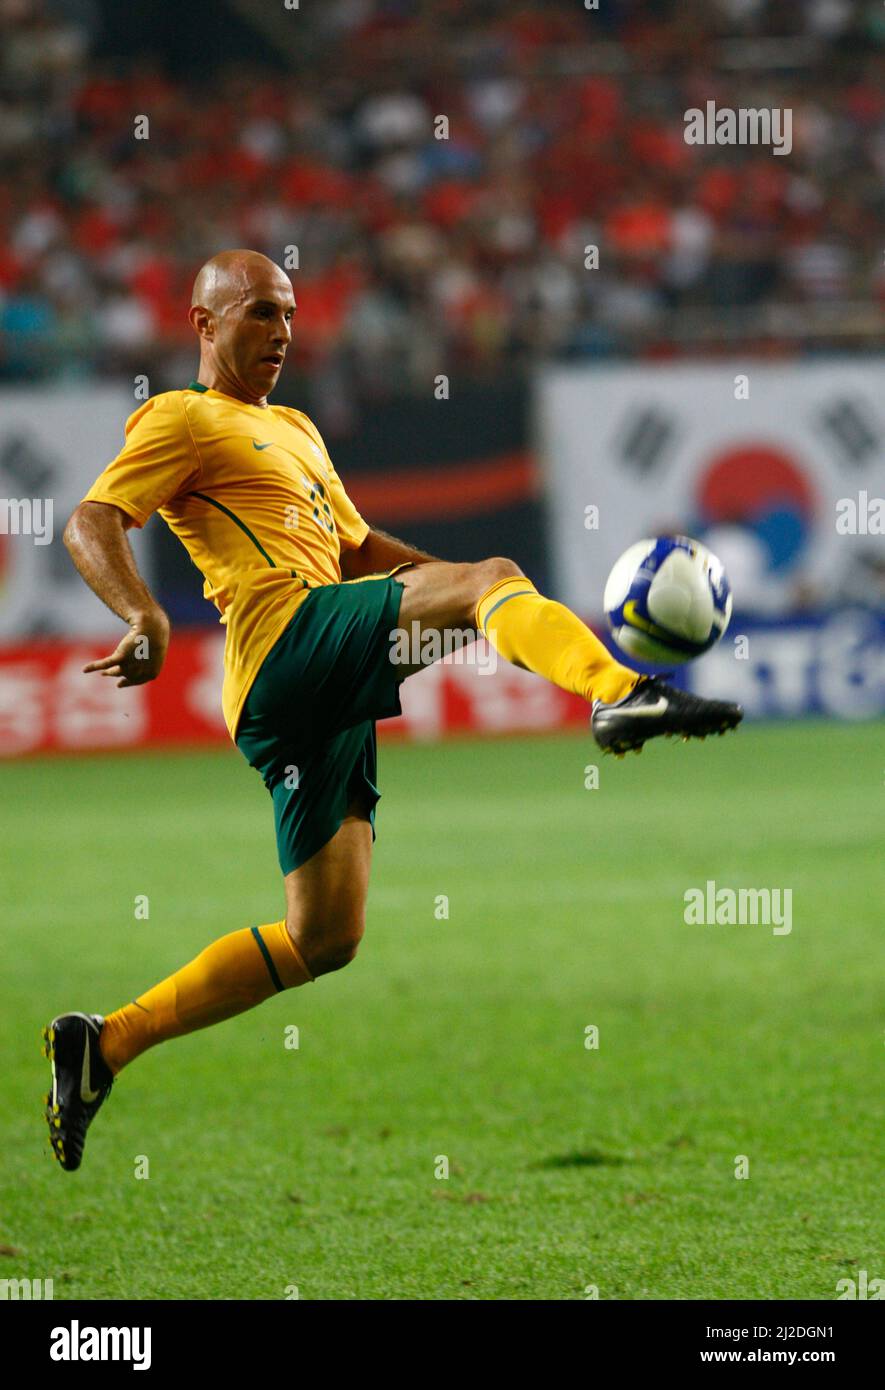 Sep 5, 2009-Seoul, South Korea-Mark Bresciano of Australia in action during the international friendly match between South Korea and the Australian Socceroos at Seoul World Cup Stadium on September 5, 2009 in Seoul, South Korea. Stock Photo